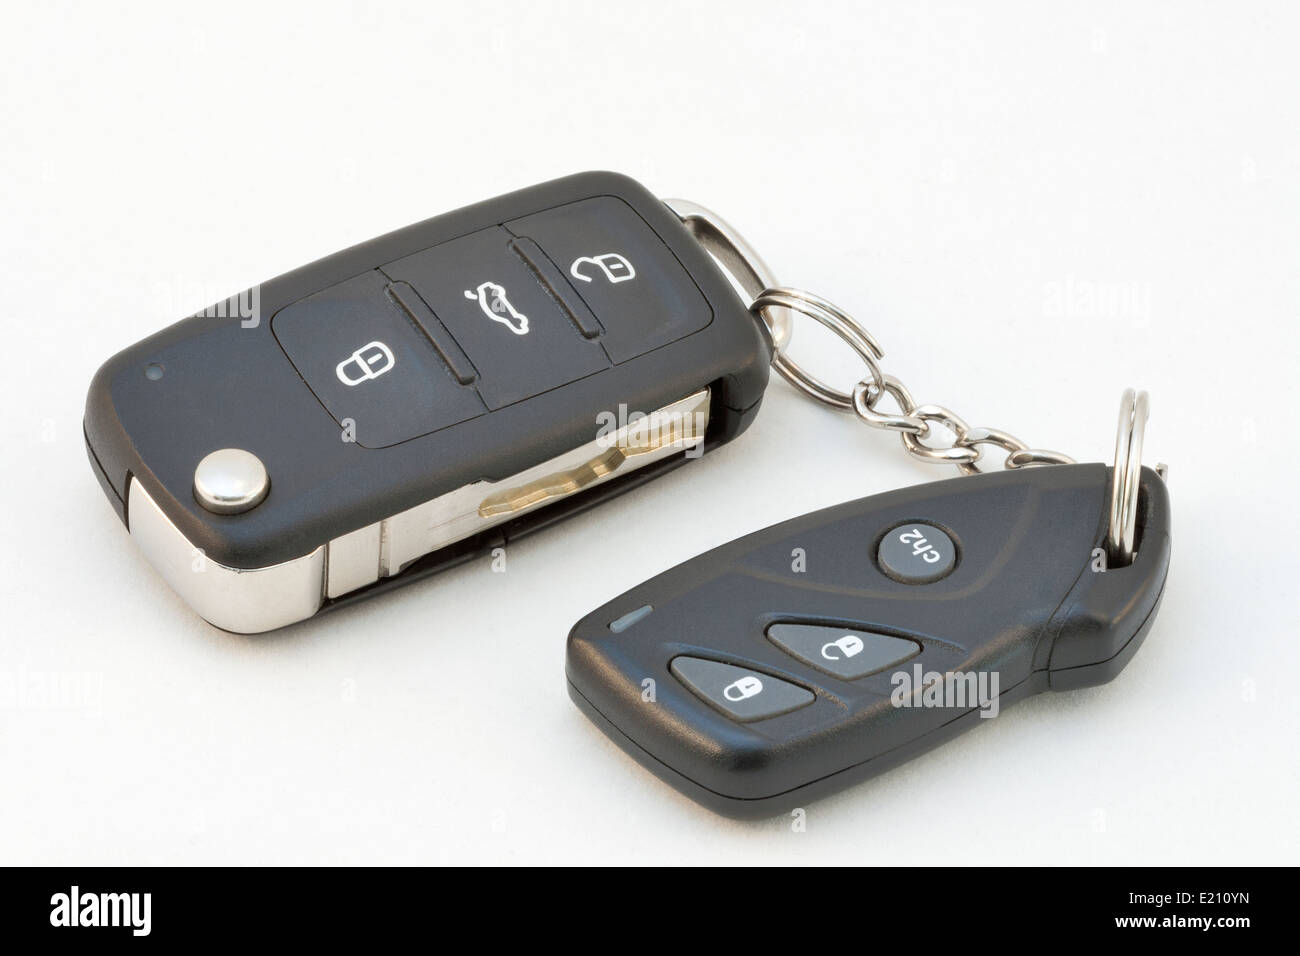 Modern Car Key and Remote against White Background Stock Photo